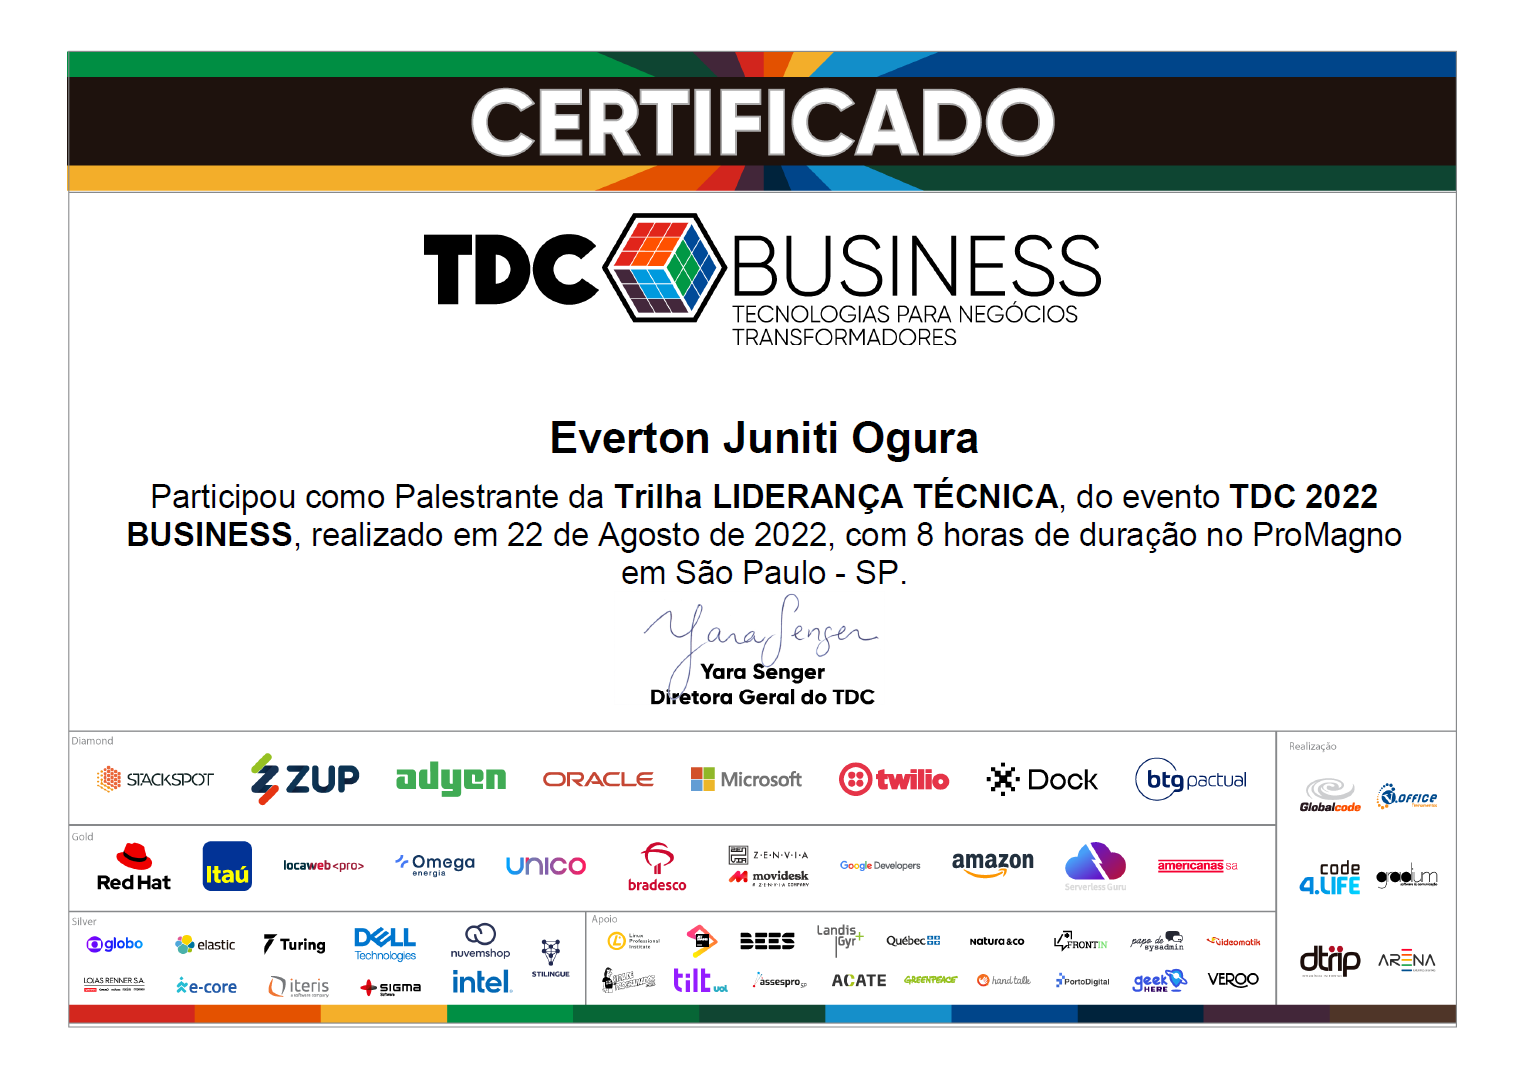 Picture of the participation certificate as a speaker at TDC Business 2022